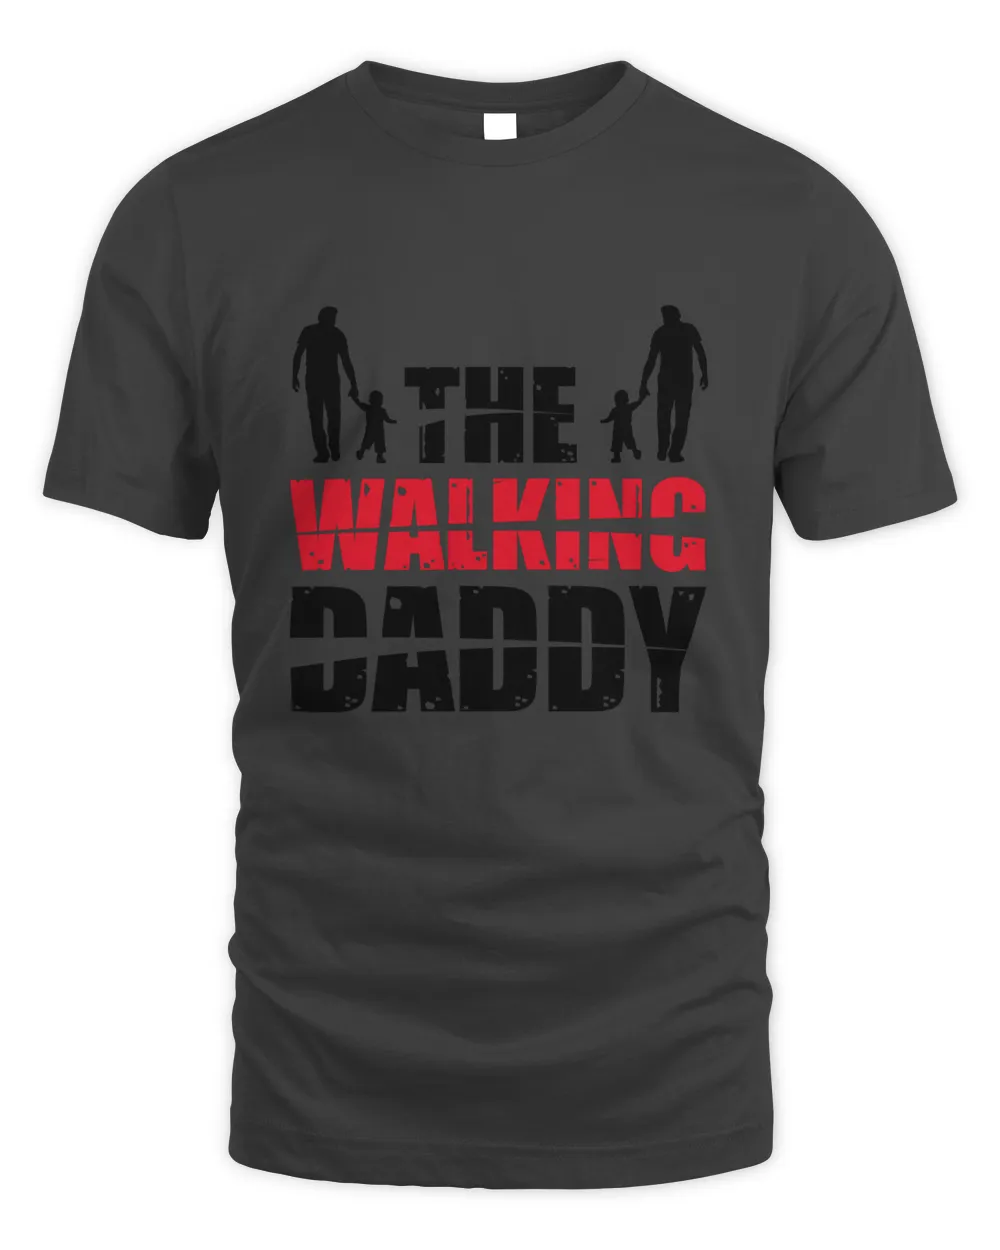 The Walking Daddy Fathers Day T shirts